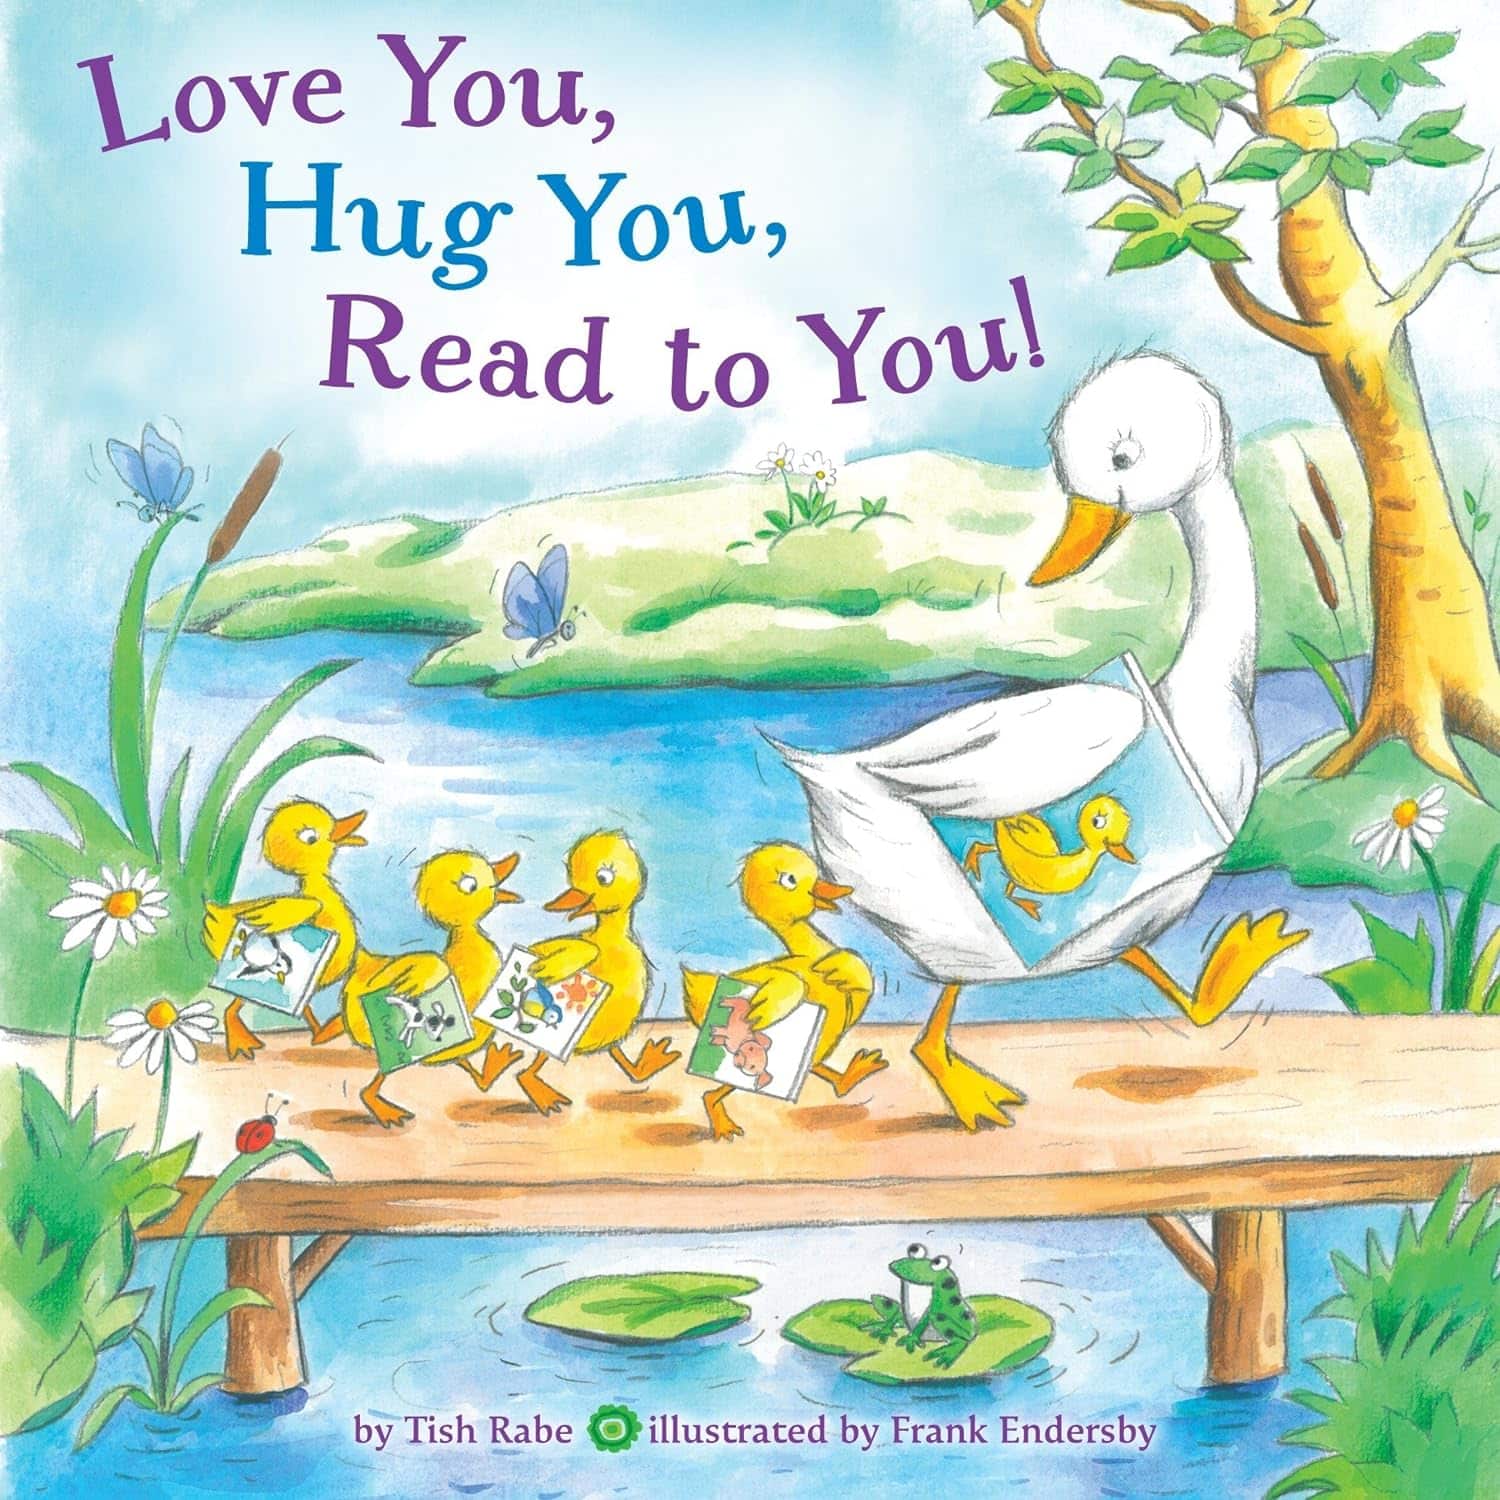 Love You, Hug You, Read To You! by Tish Rabe